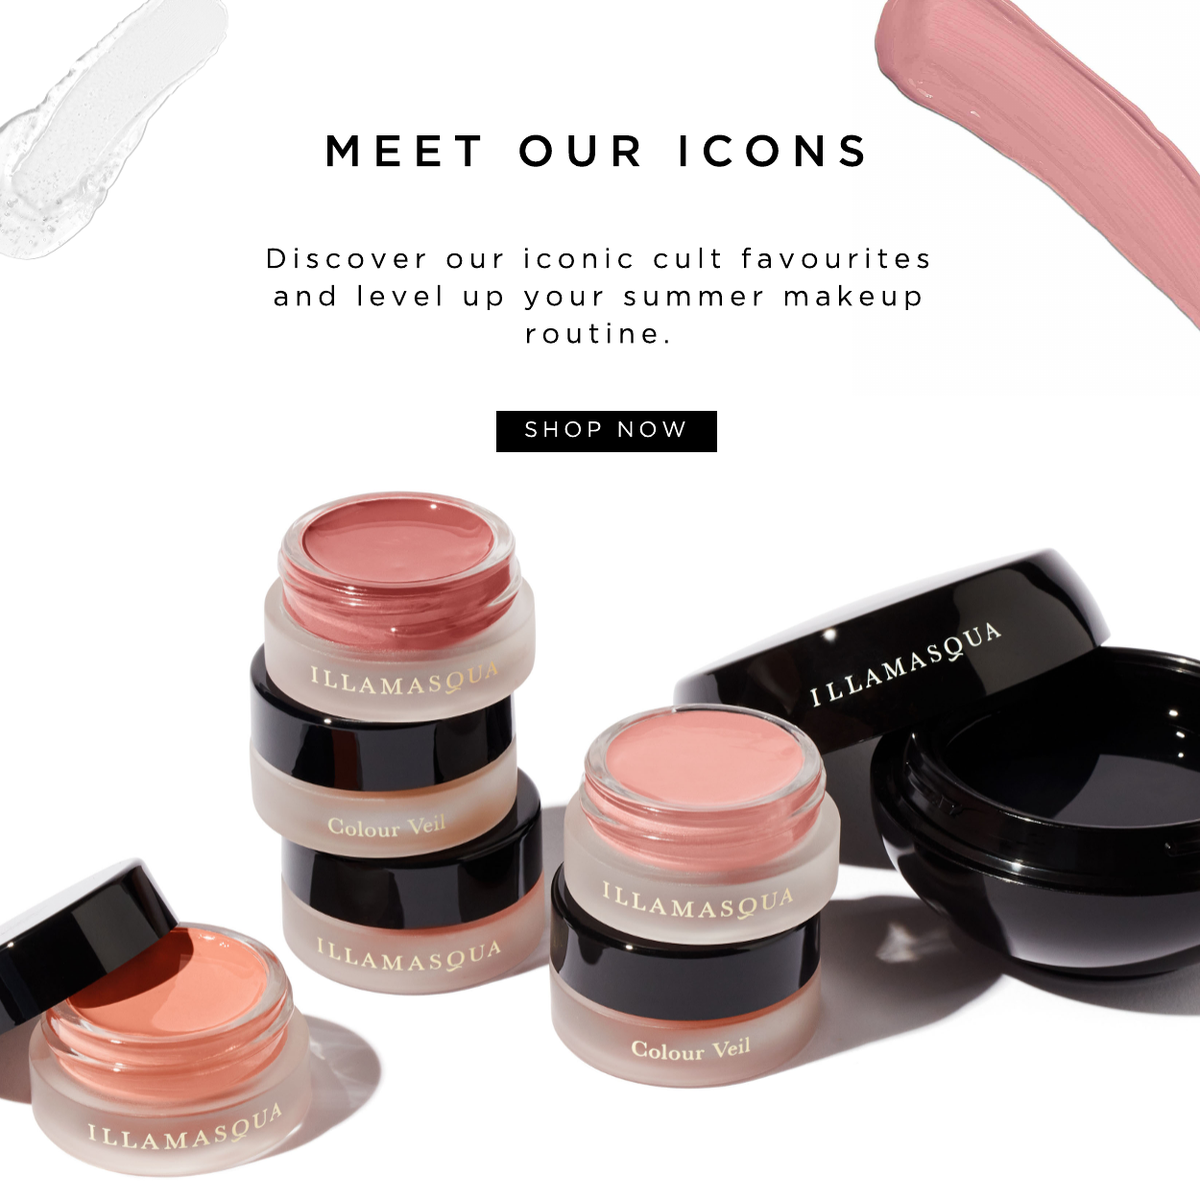 Meet our icons featuring Hydra Veil Primer and Colour Veil Blusher